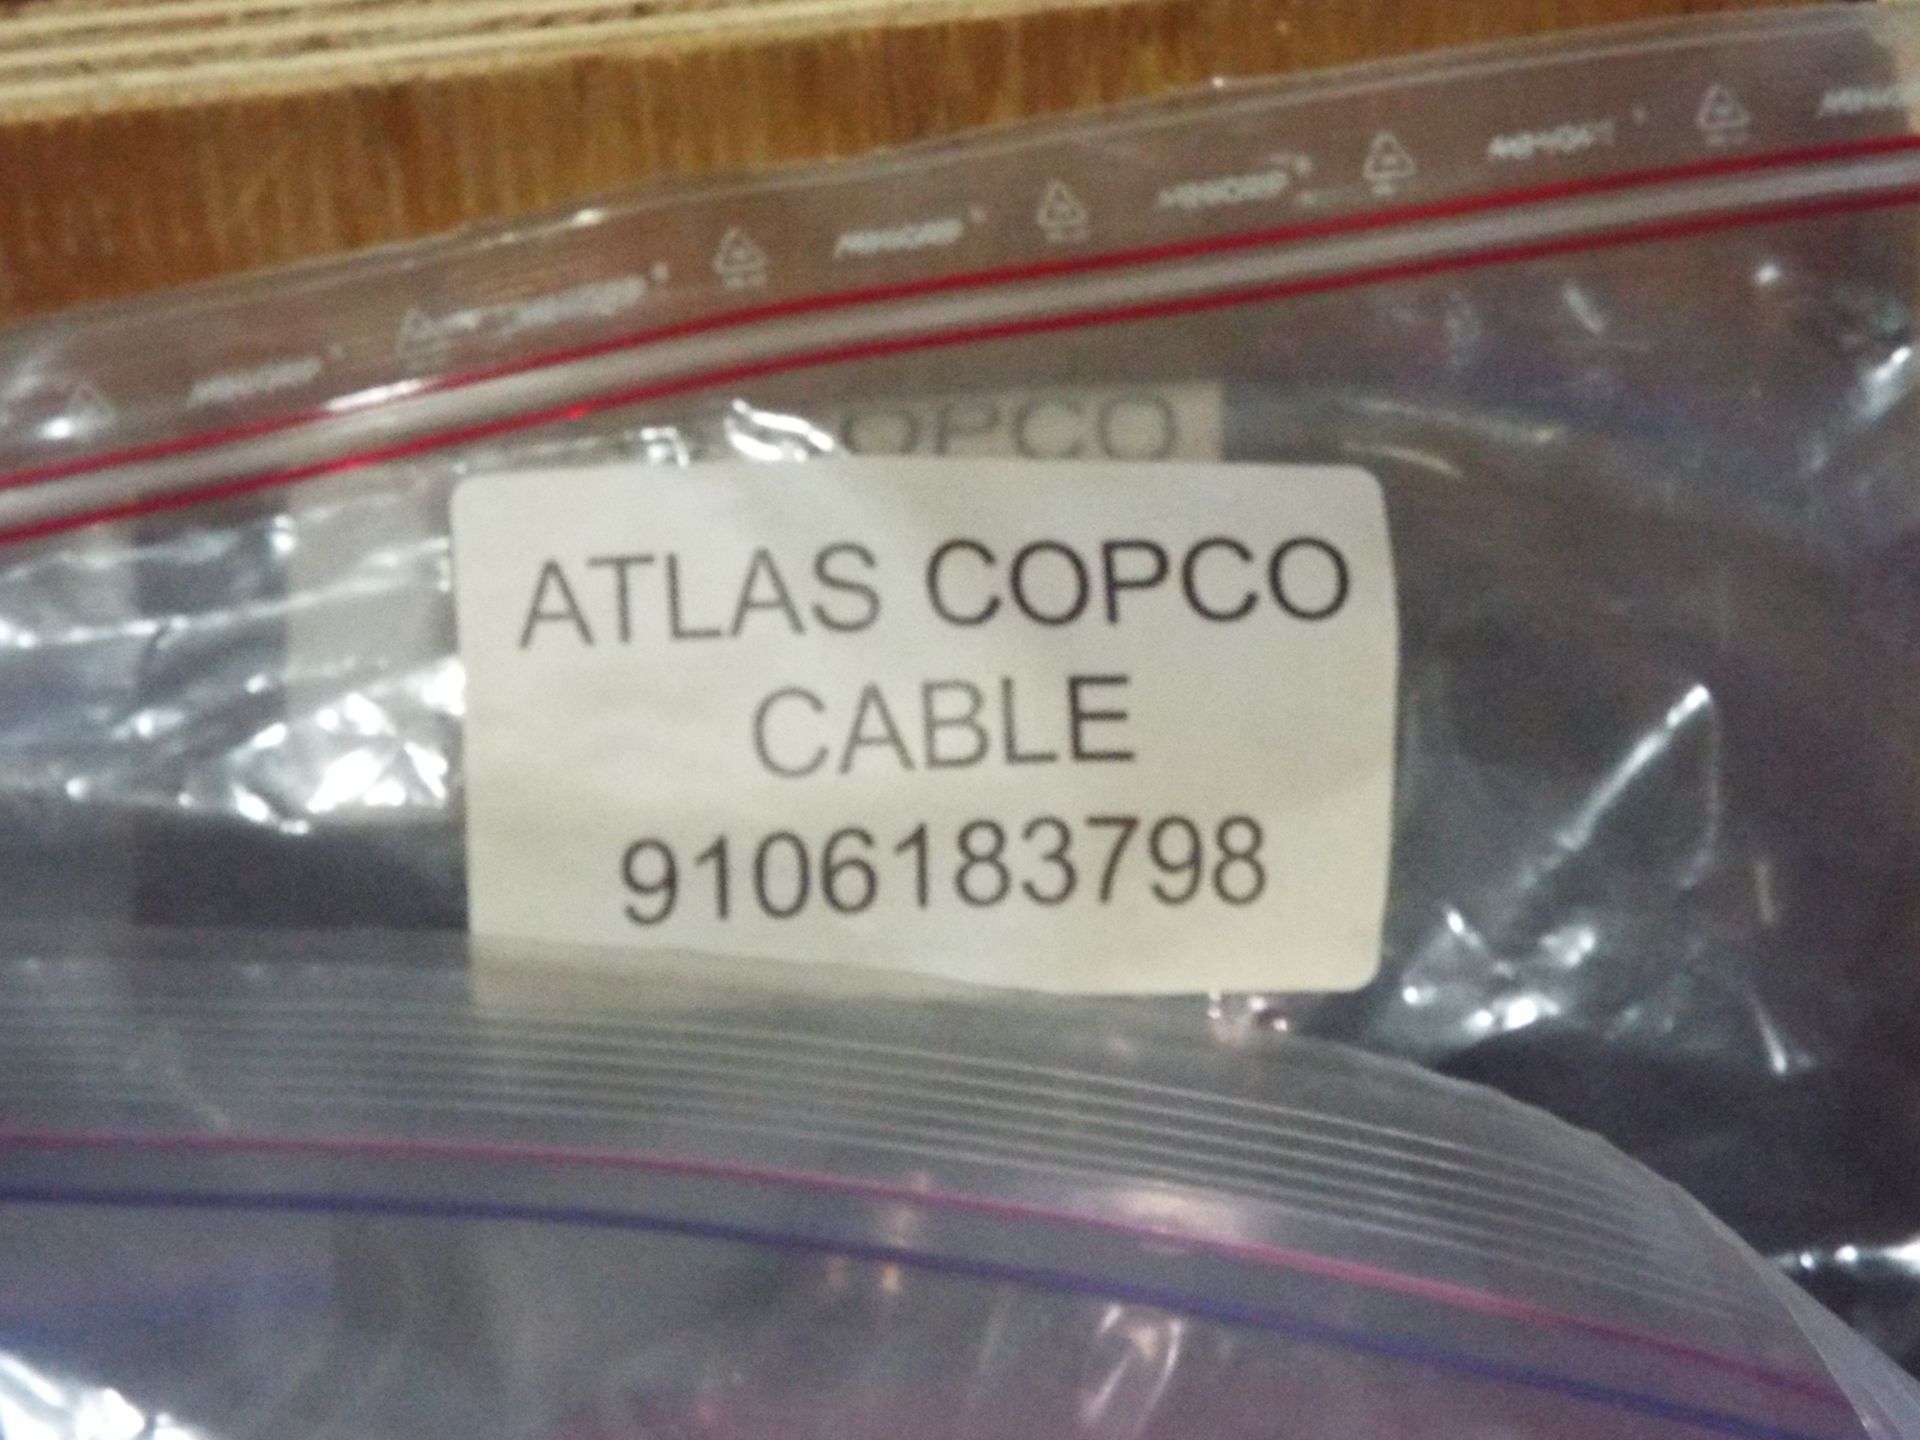 LOT/ ATLAS COPCO PARTS INCLUDING BUSHING STEEL, CONE, BAT CABLE, AND OTHER CABLES/HARNESSES - Image 14 of 16